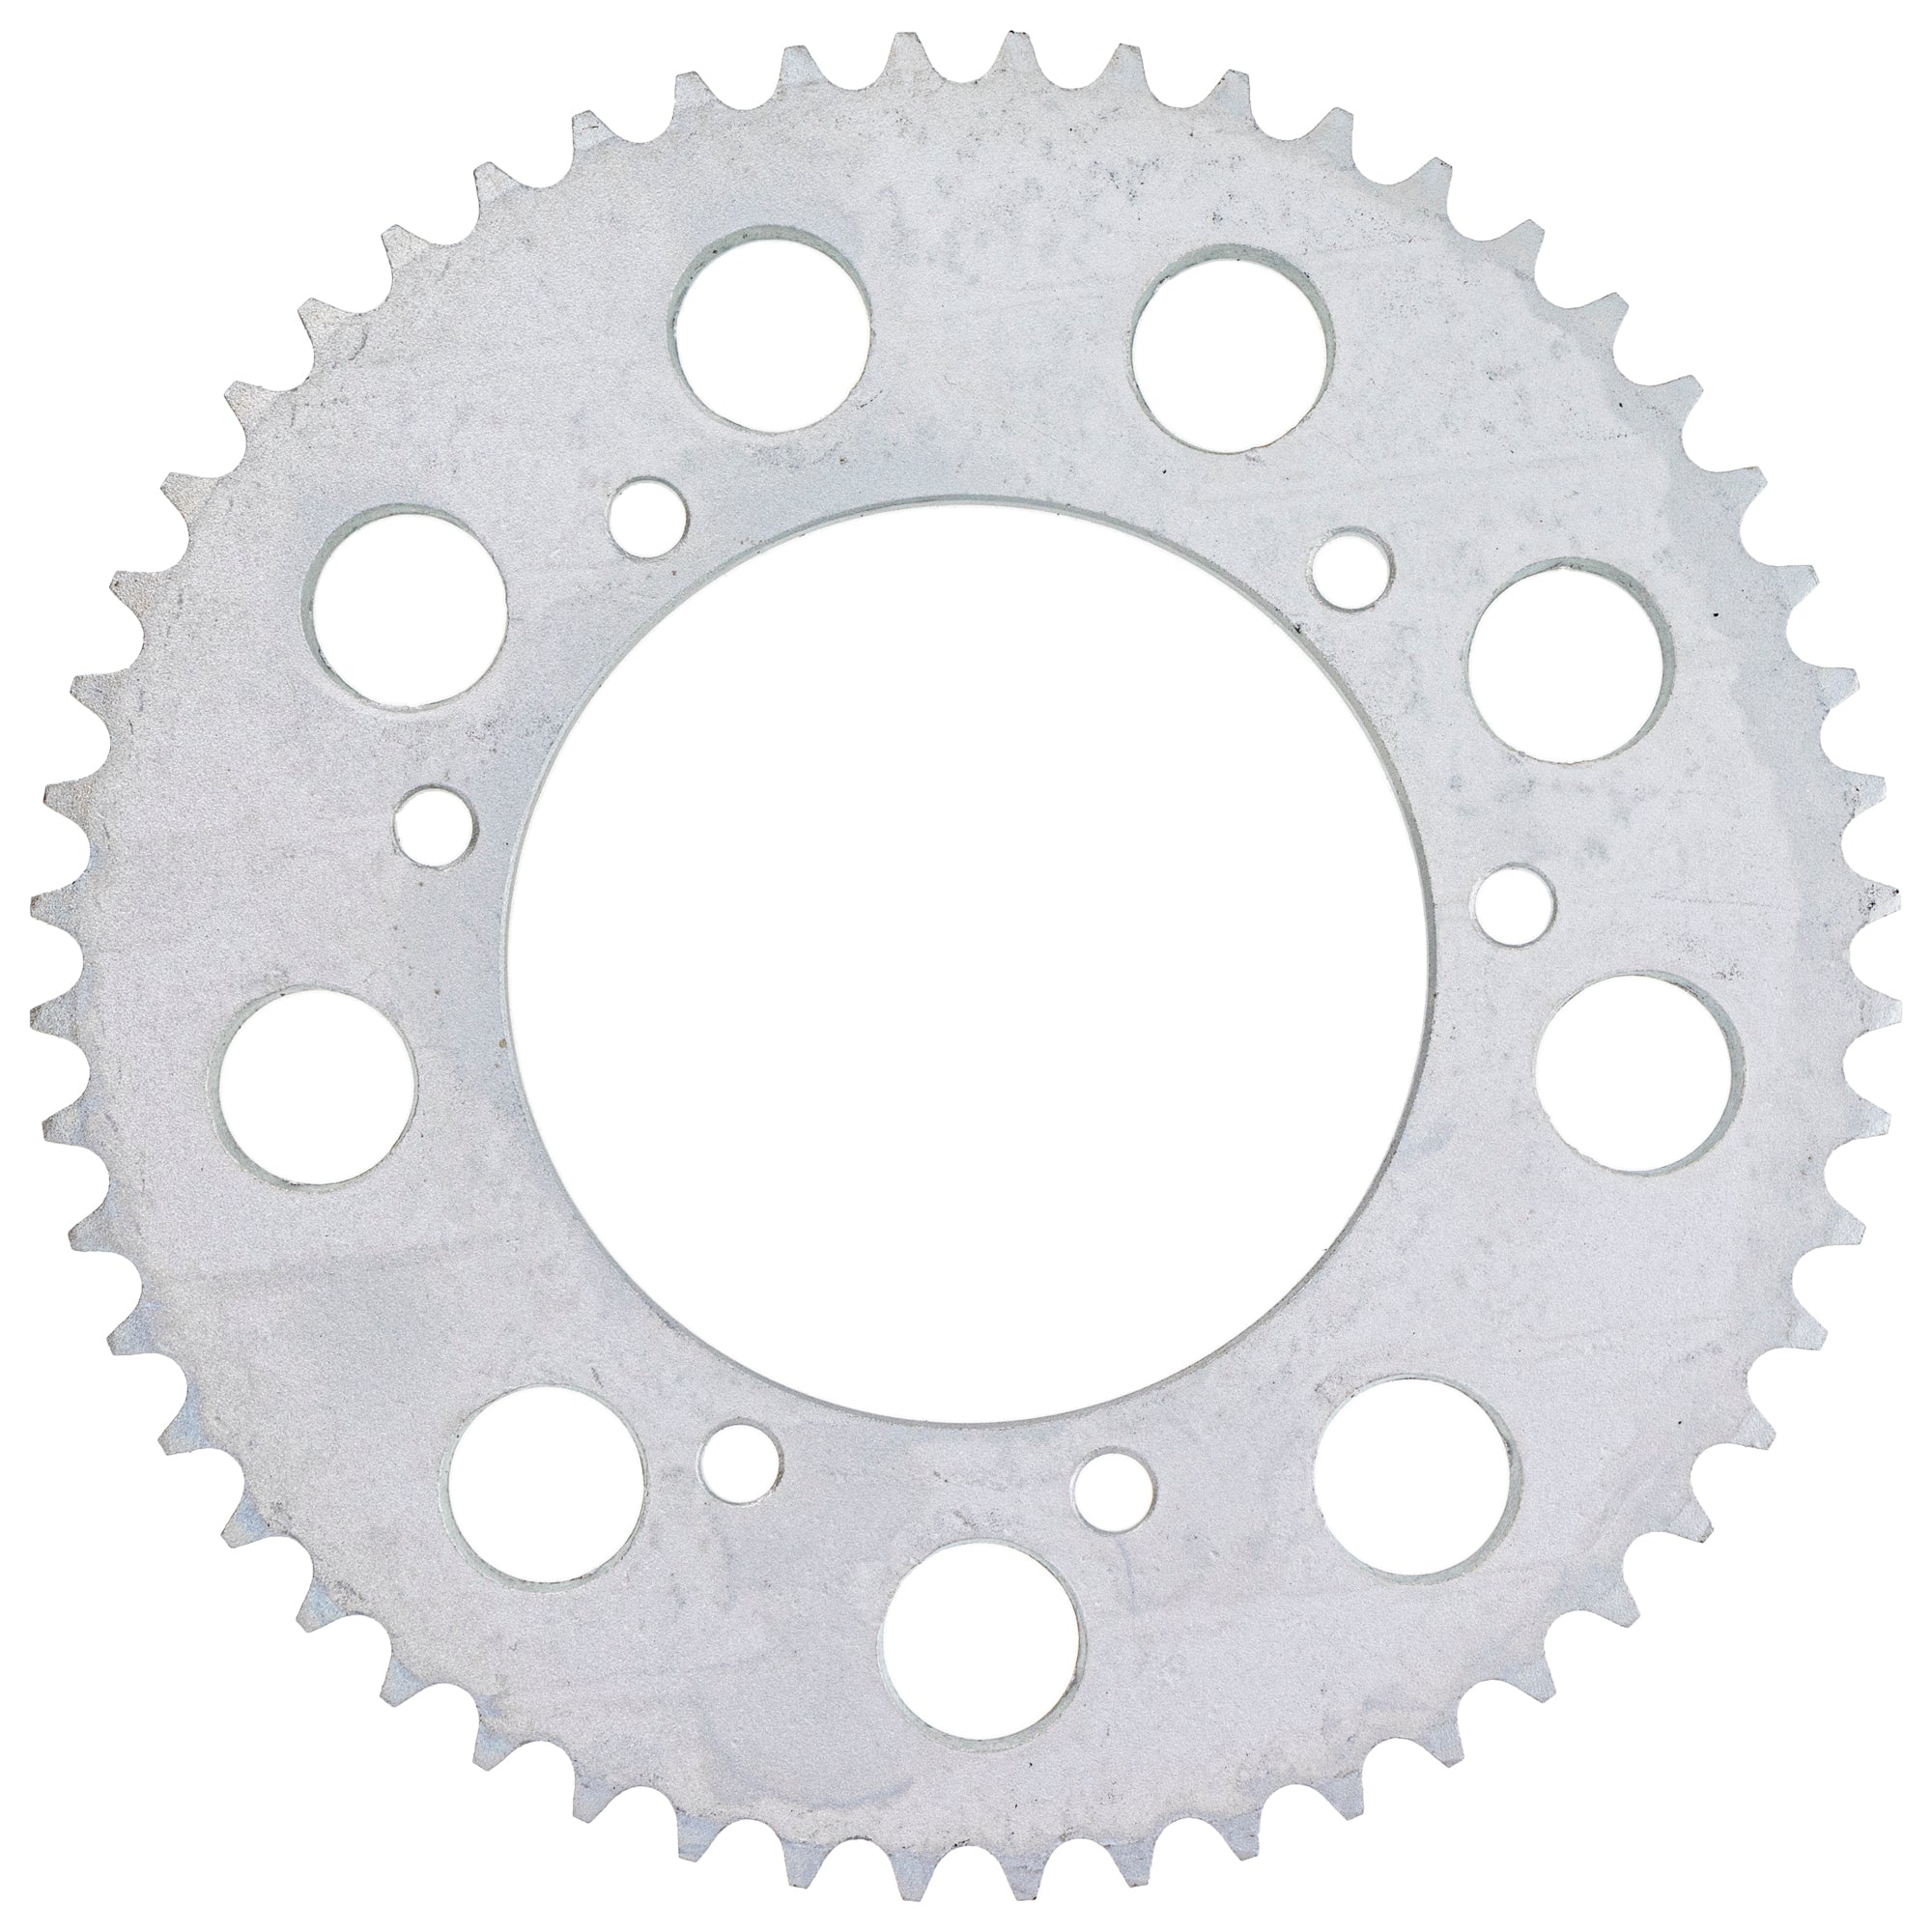 420 Front 11T Rear 52T Tooth Drive Sprocket Kit for Peugeot XR6 50